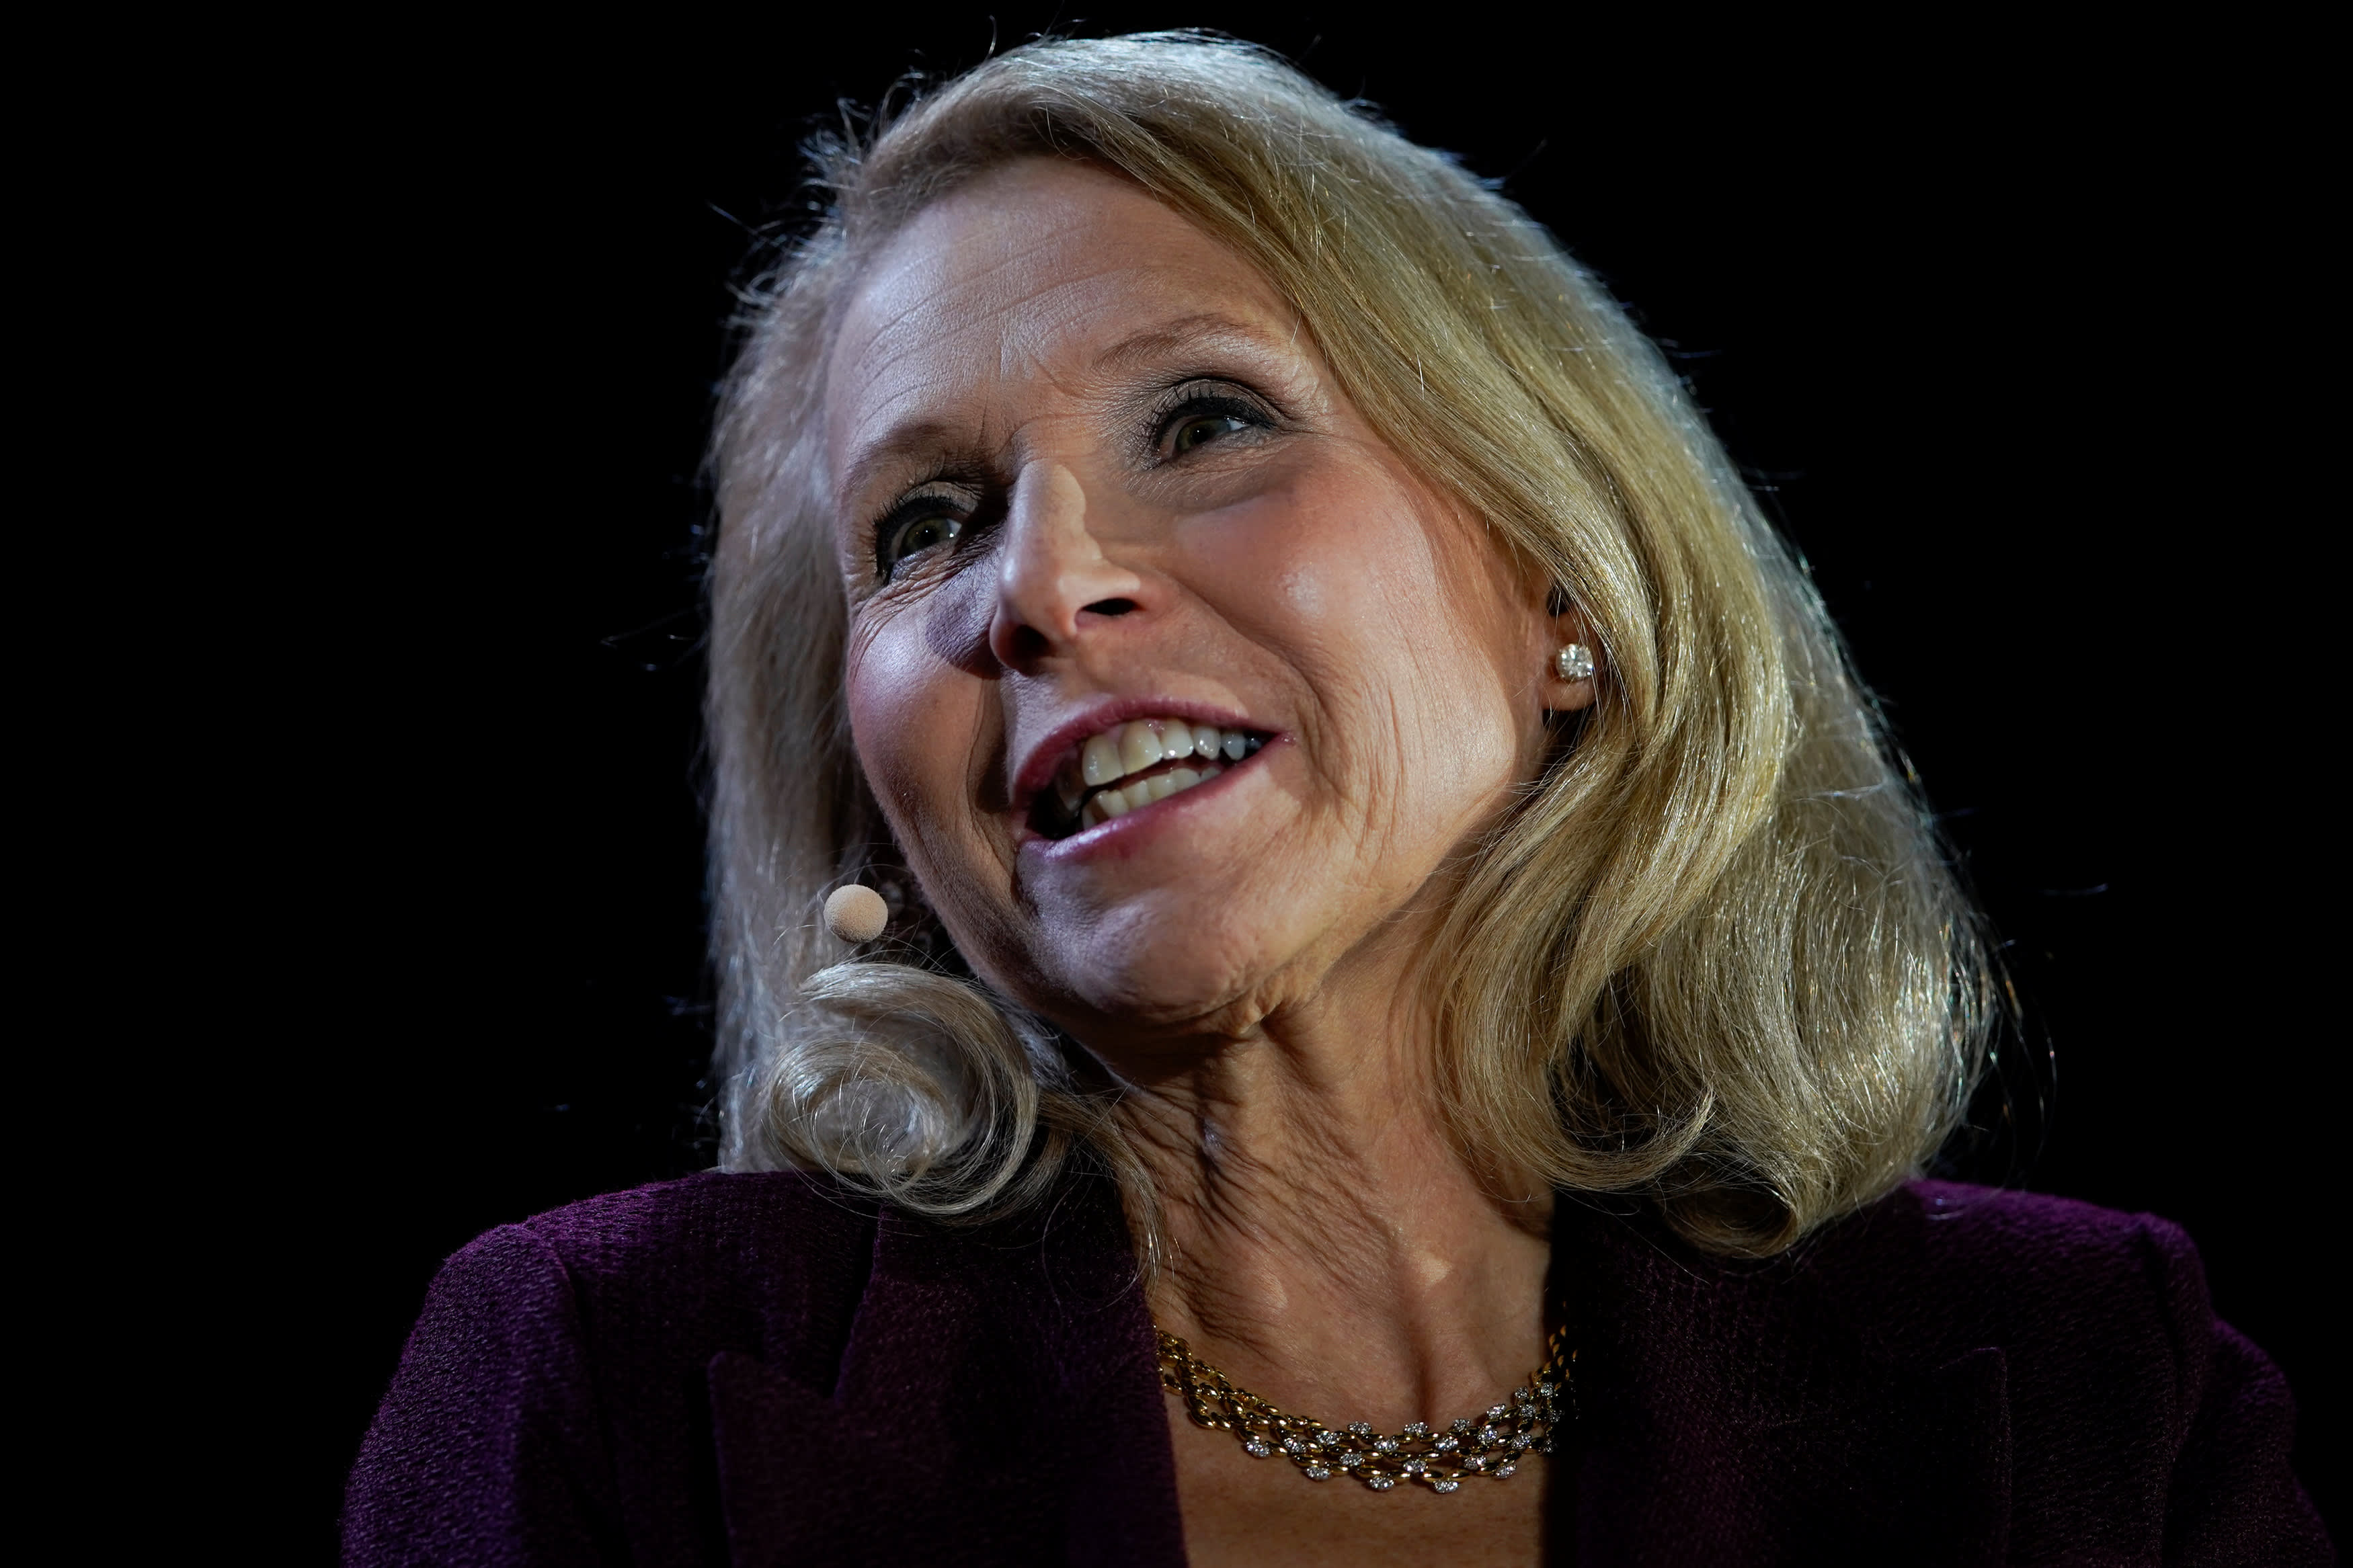 Why Shari Redstone needs the right deal